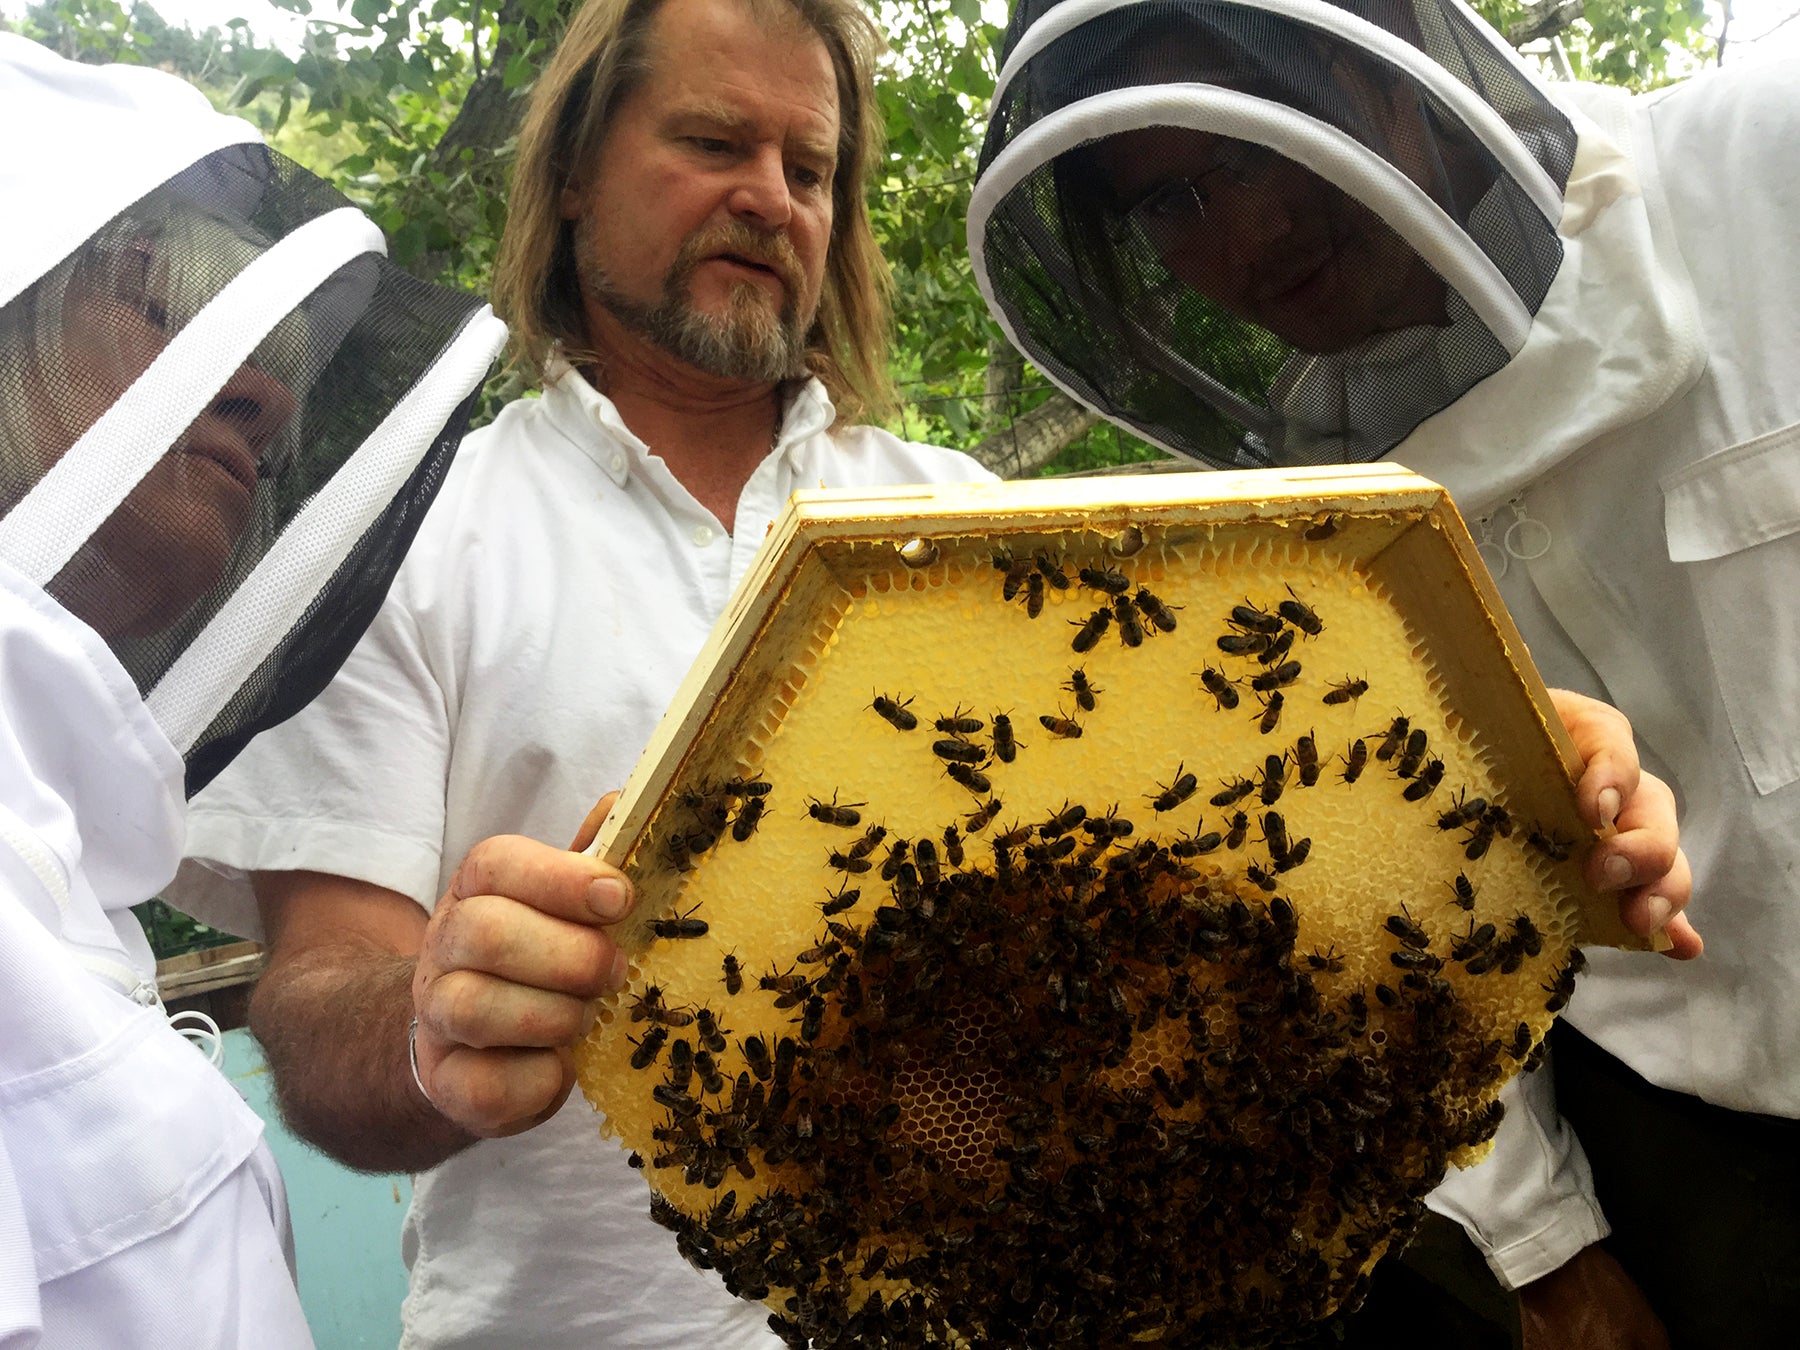 Corwin Bell and Bee gurdian beekeepers inpsecing a Cathedral Hive brood comb